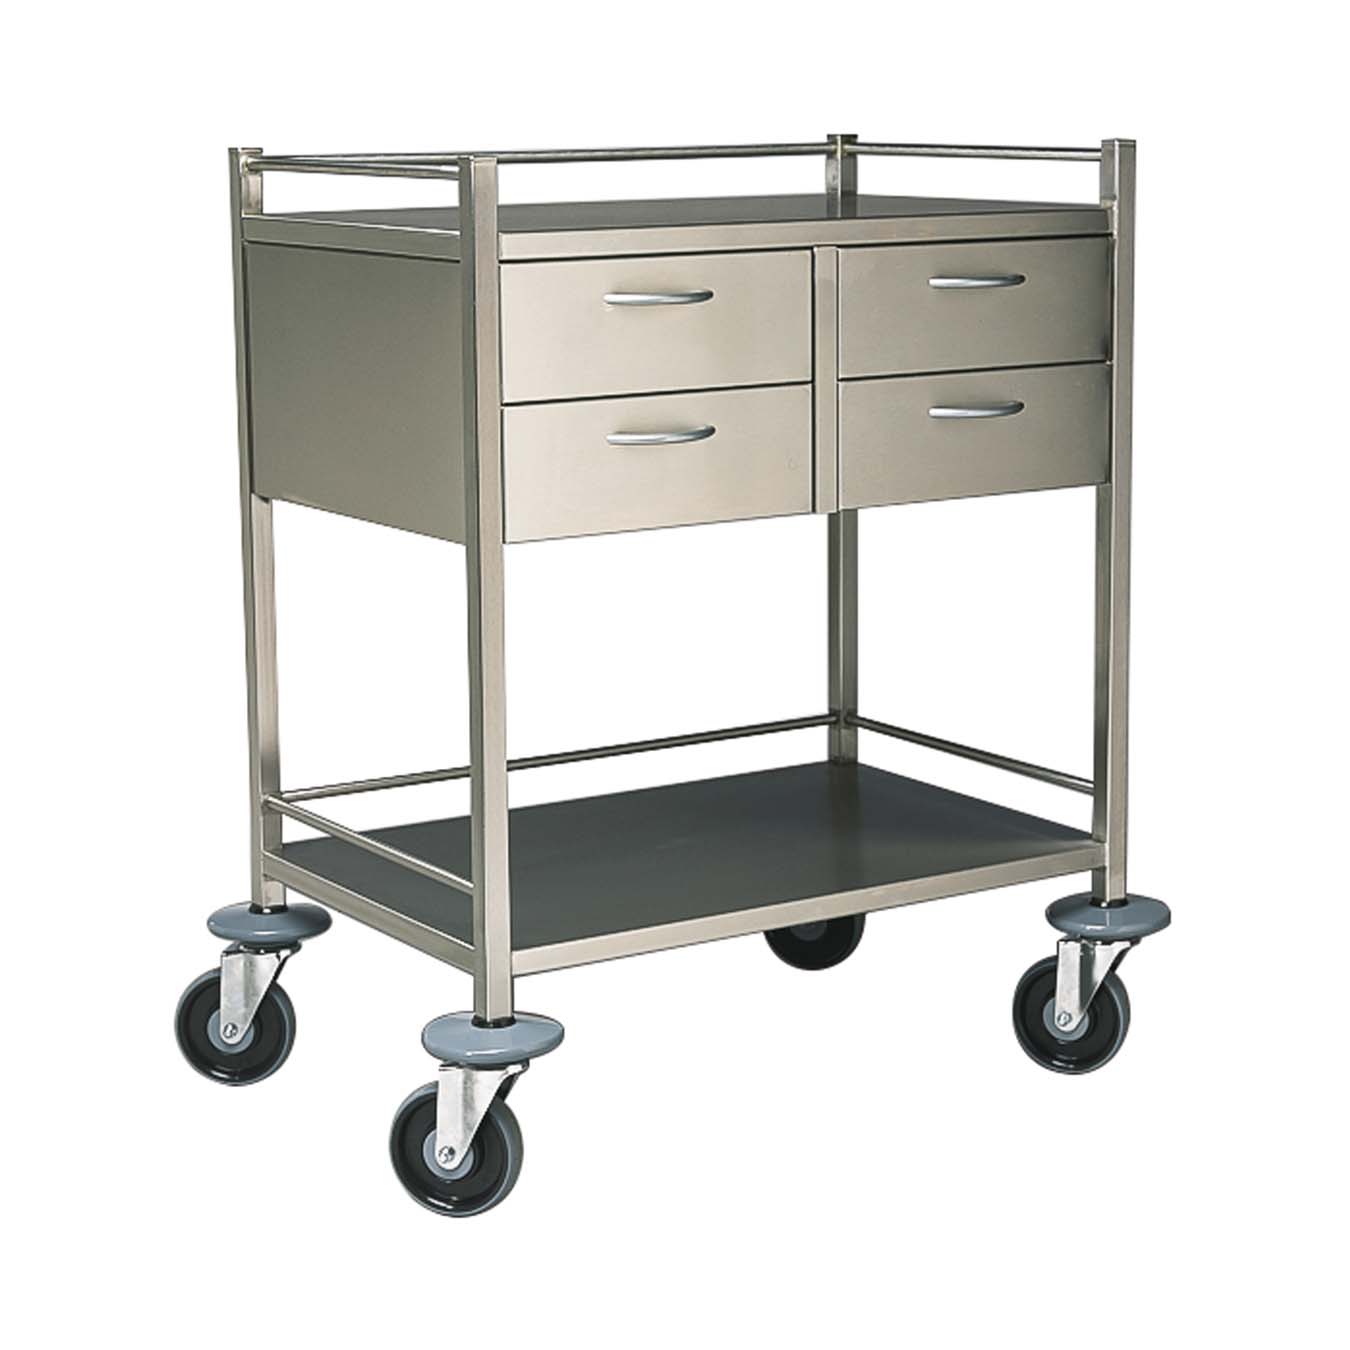 AX107_1_Resuscitation-Trolley-4-Drawer-Stainless-Steel_750x490x900mm_1